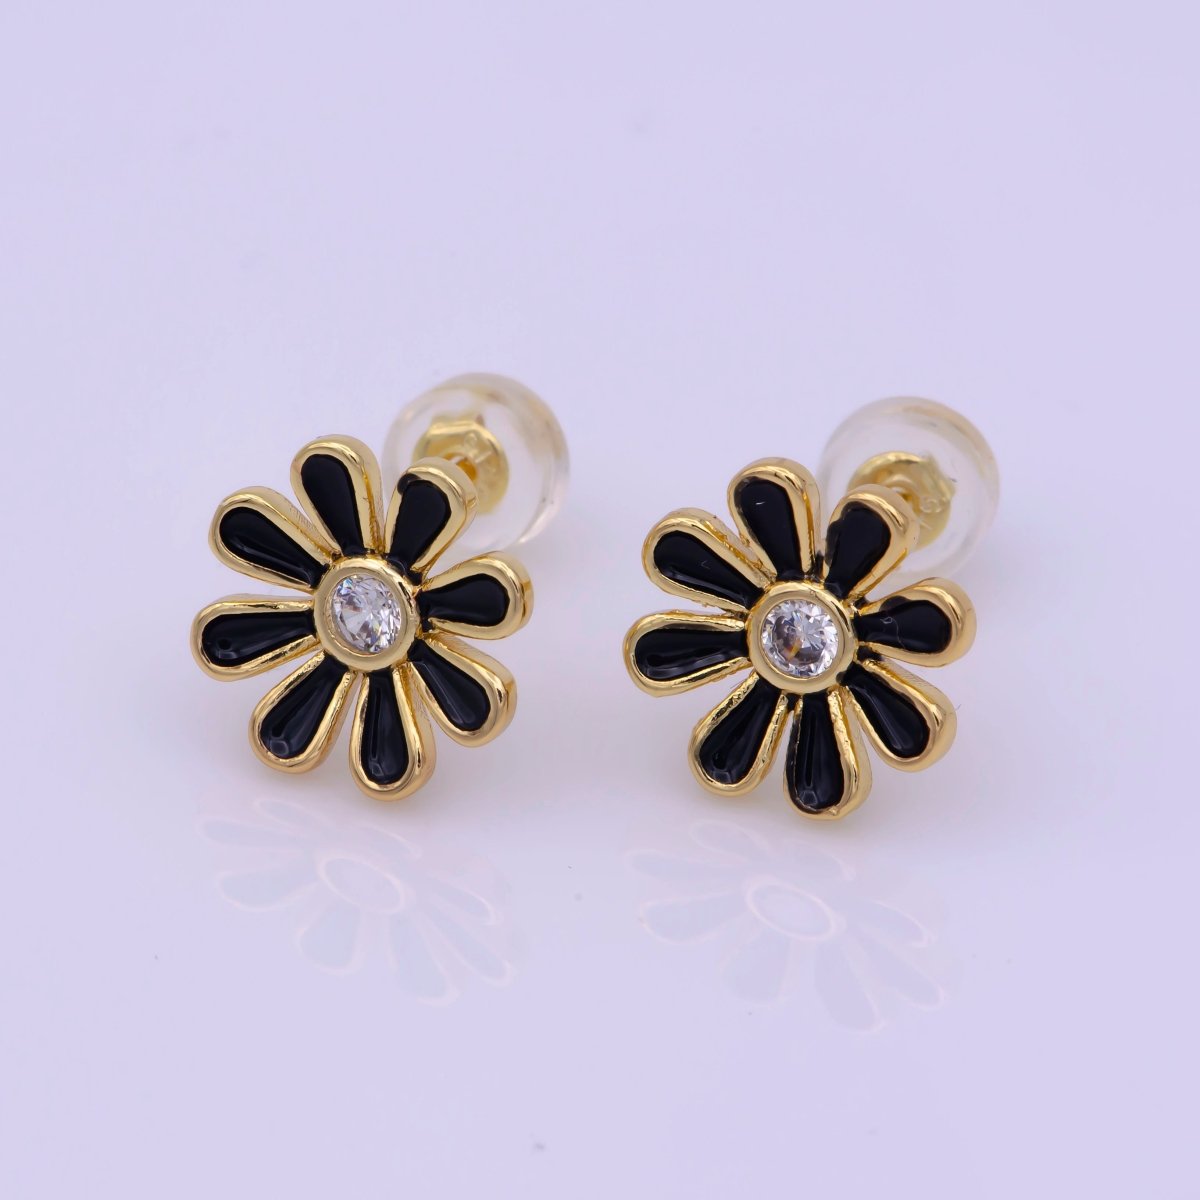 Daisy Earring Studs Floral Flower 18K Gold Plated Cute Dainty Earring for Gift T-198 ~ T-200 - DLUXCA